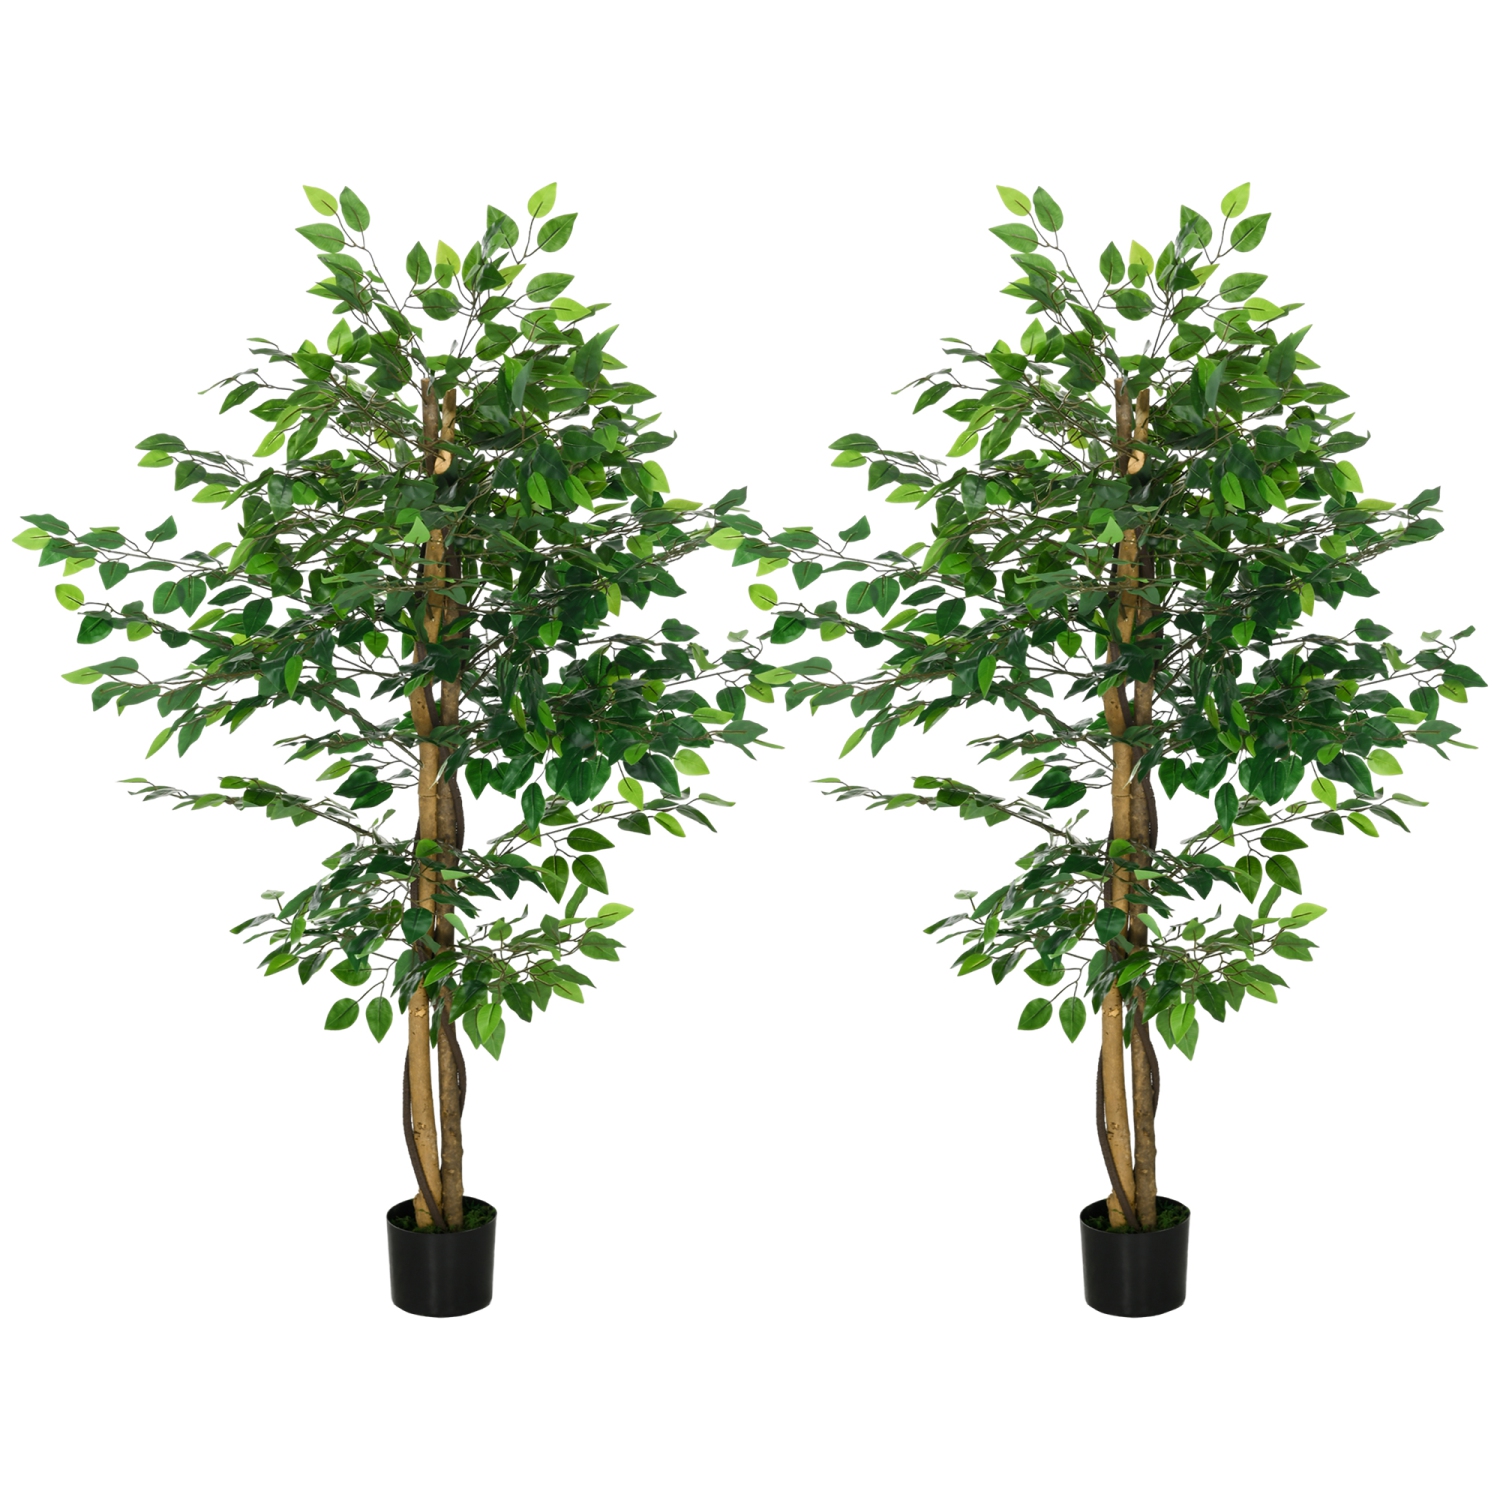 HOMCOM 5ft Set of 2 Artificial Ficus Tree with Pot, Indoor Outdoor Fake Plants for Home Office Living Room Decor